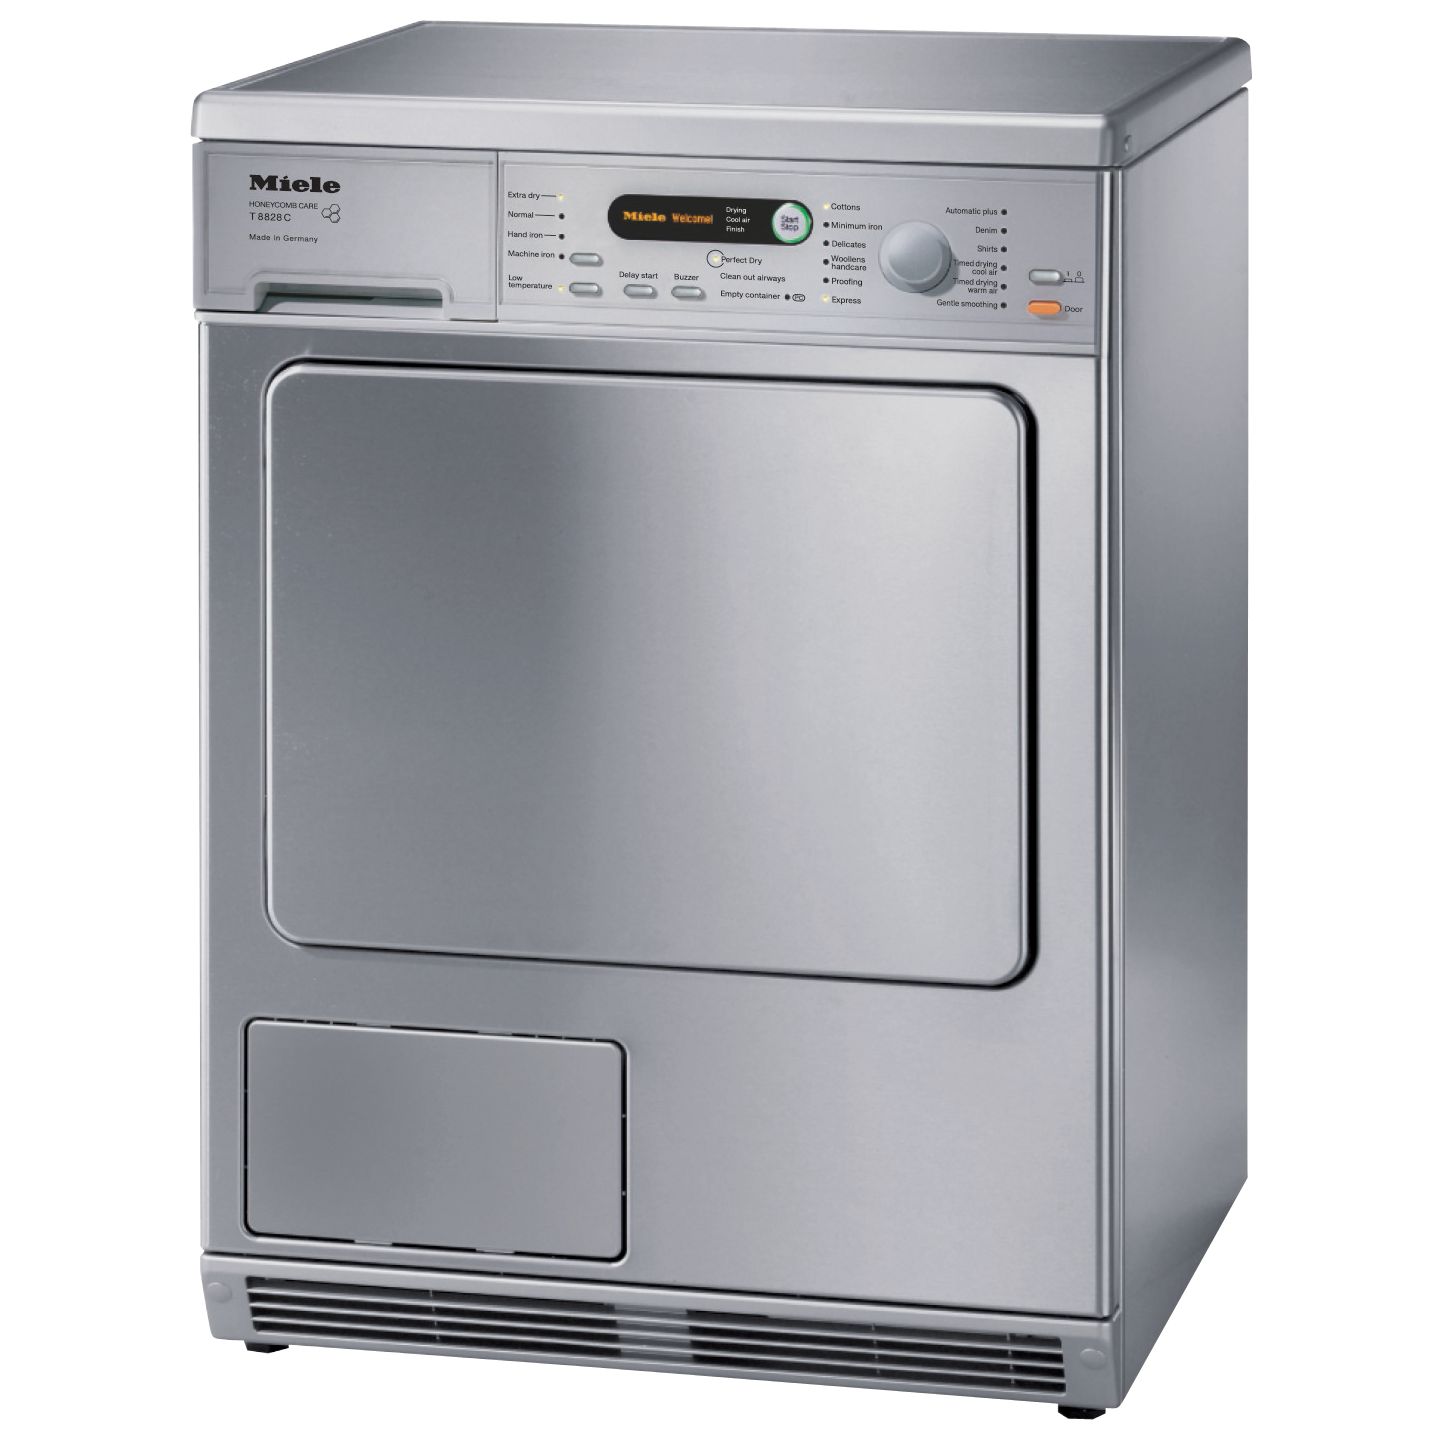 Miele T8828C Condenser Tumble Dryer, Stainless Steel at John Lewis